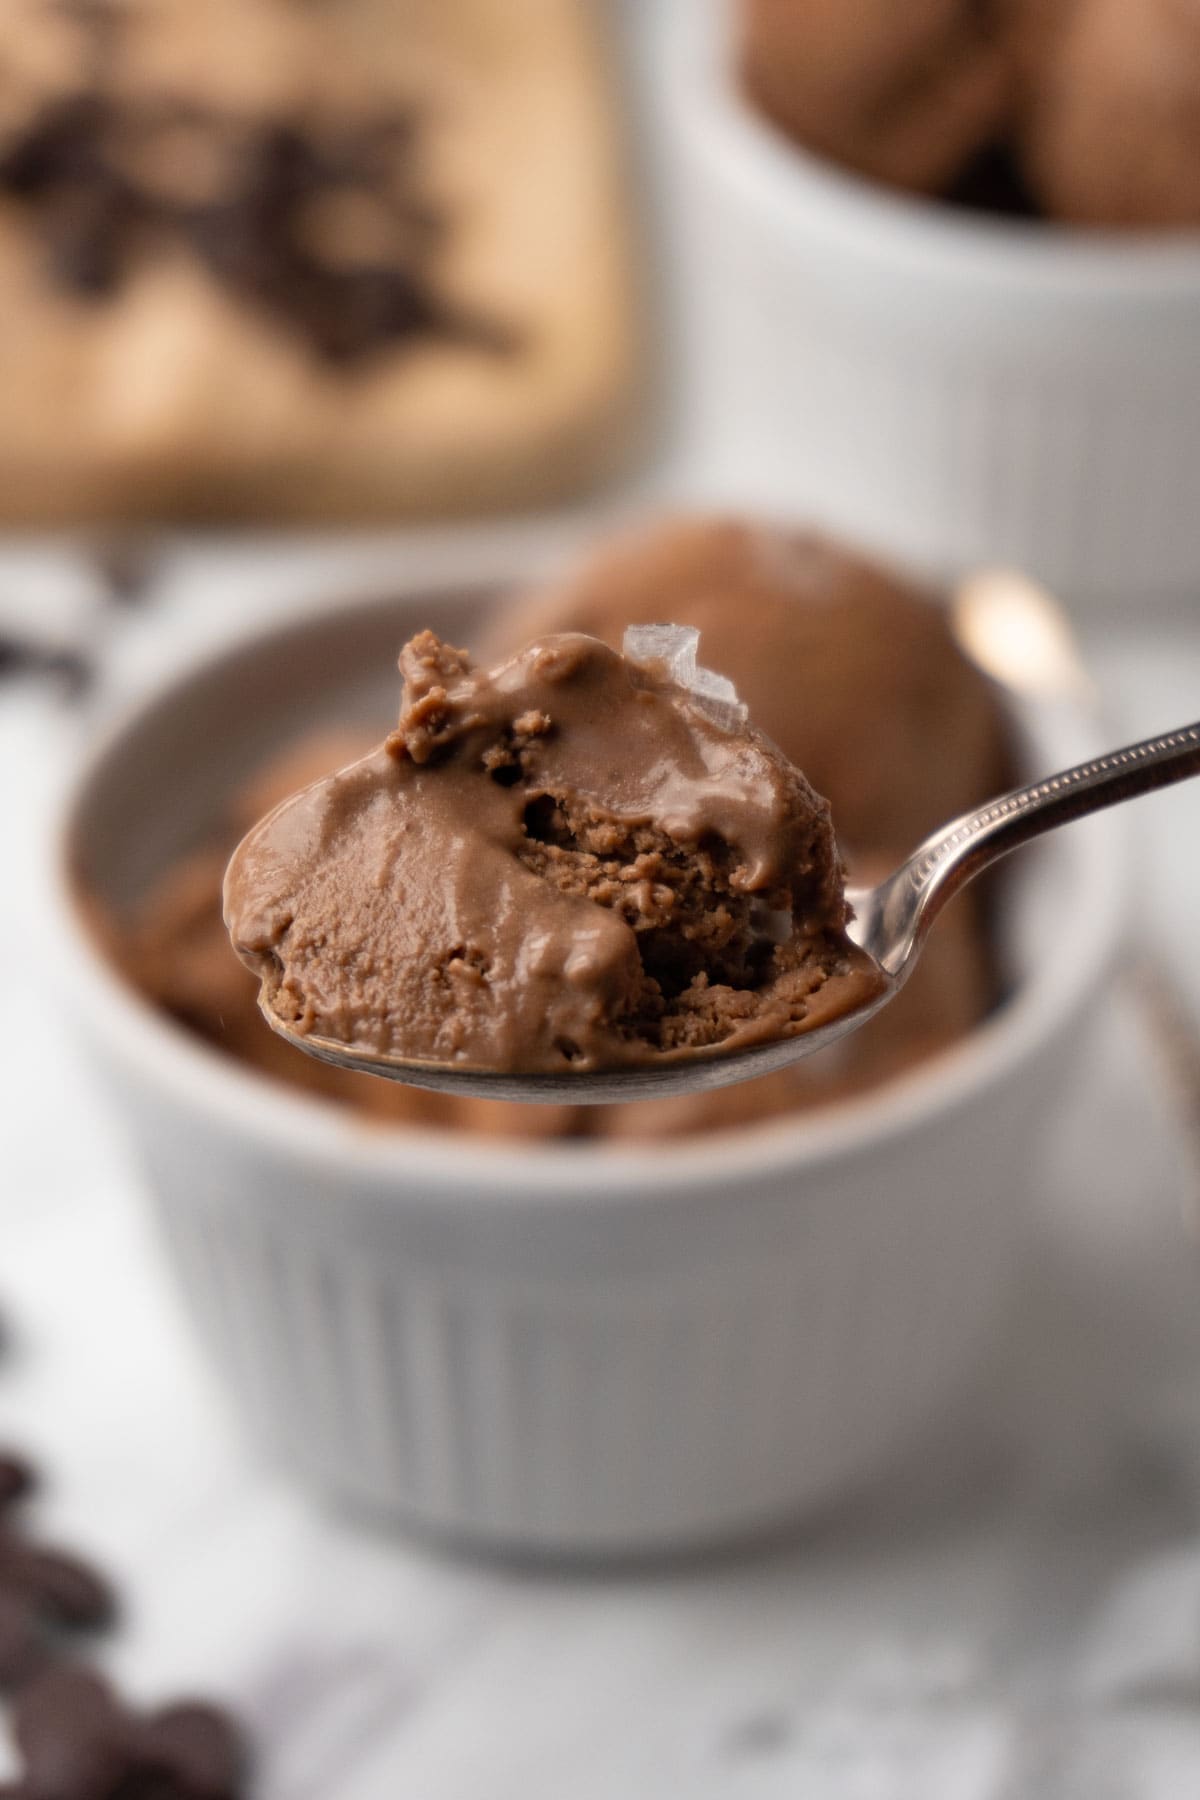 A close-up shot of a silver spoon filled with chocolate ice cream topped with sea salt flakes.